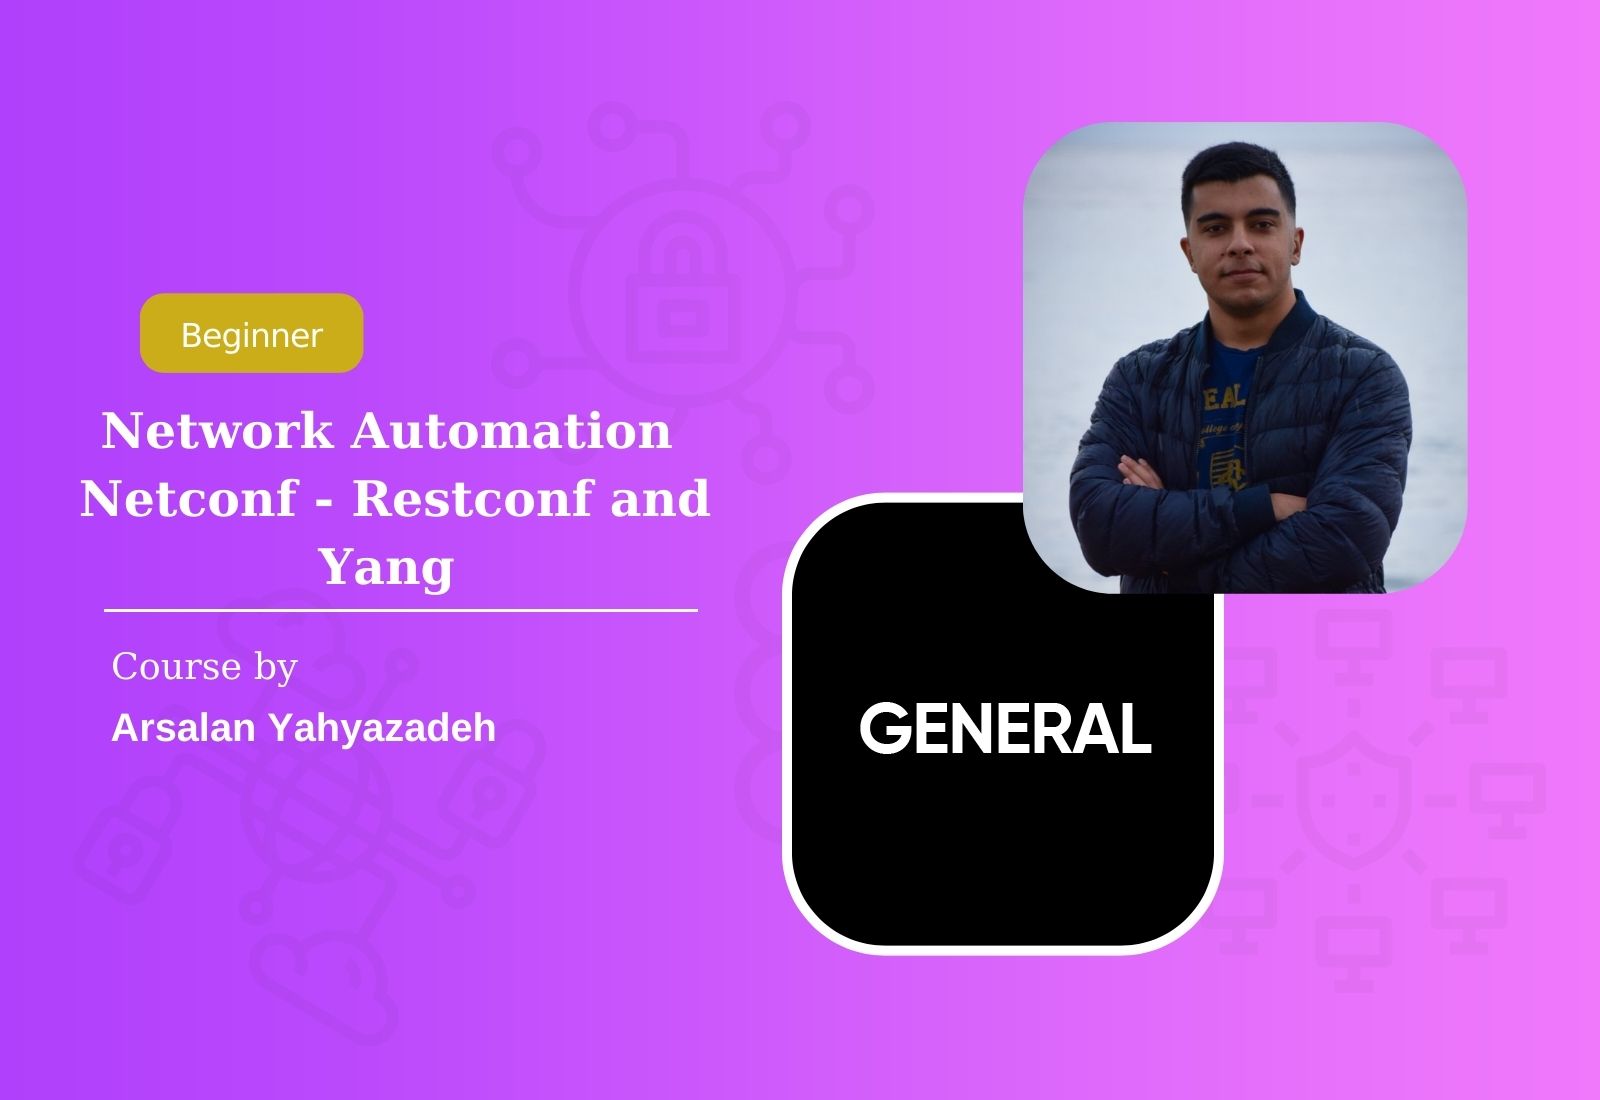 Network Automation - Netconf - Restconf and Yang 